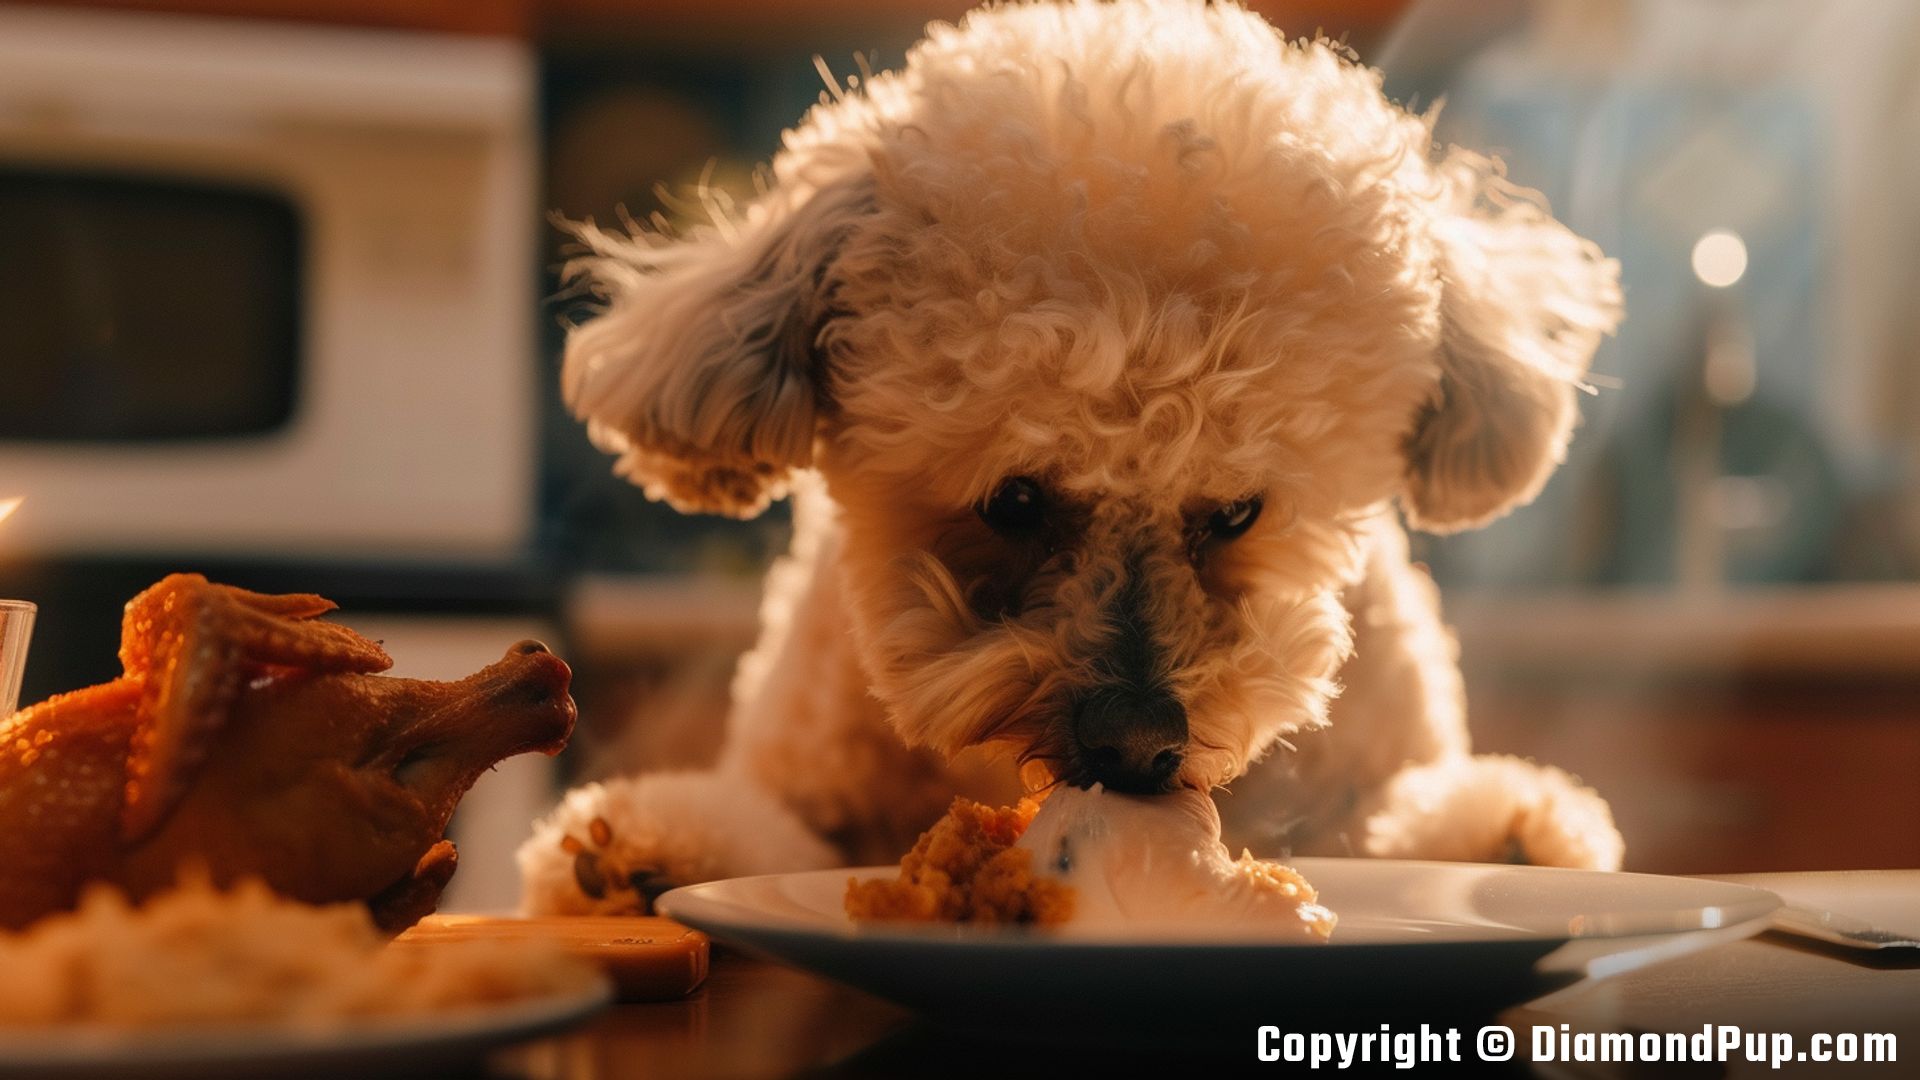 Photo of an Adorable Poodle Eating Chicken